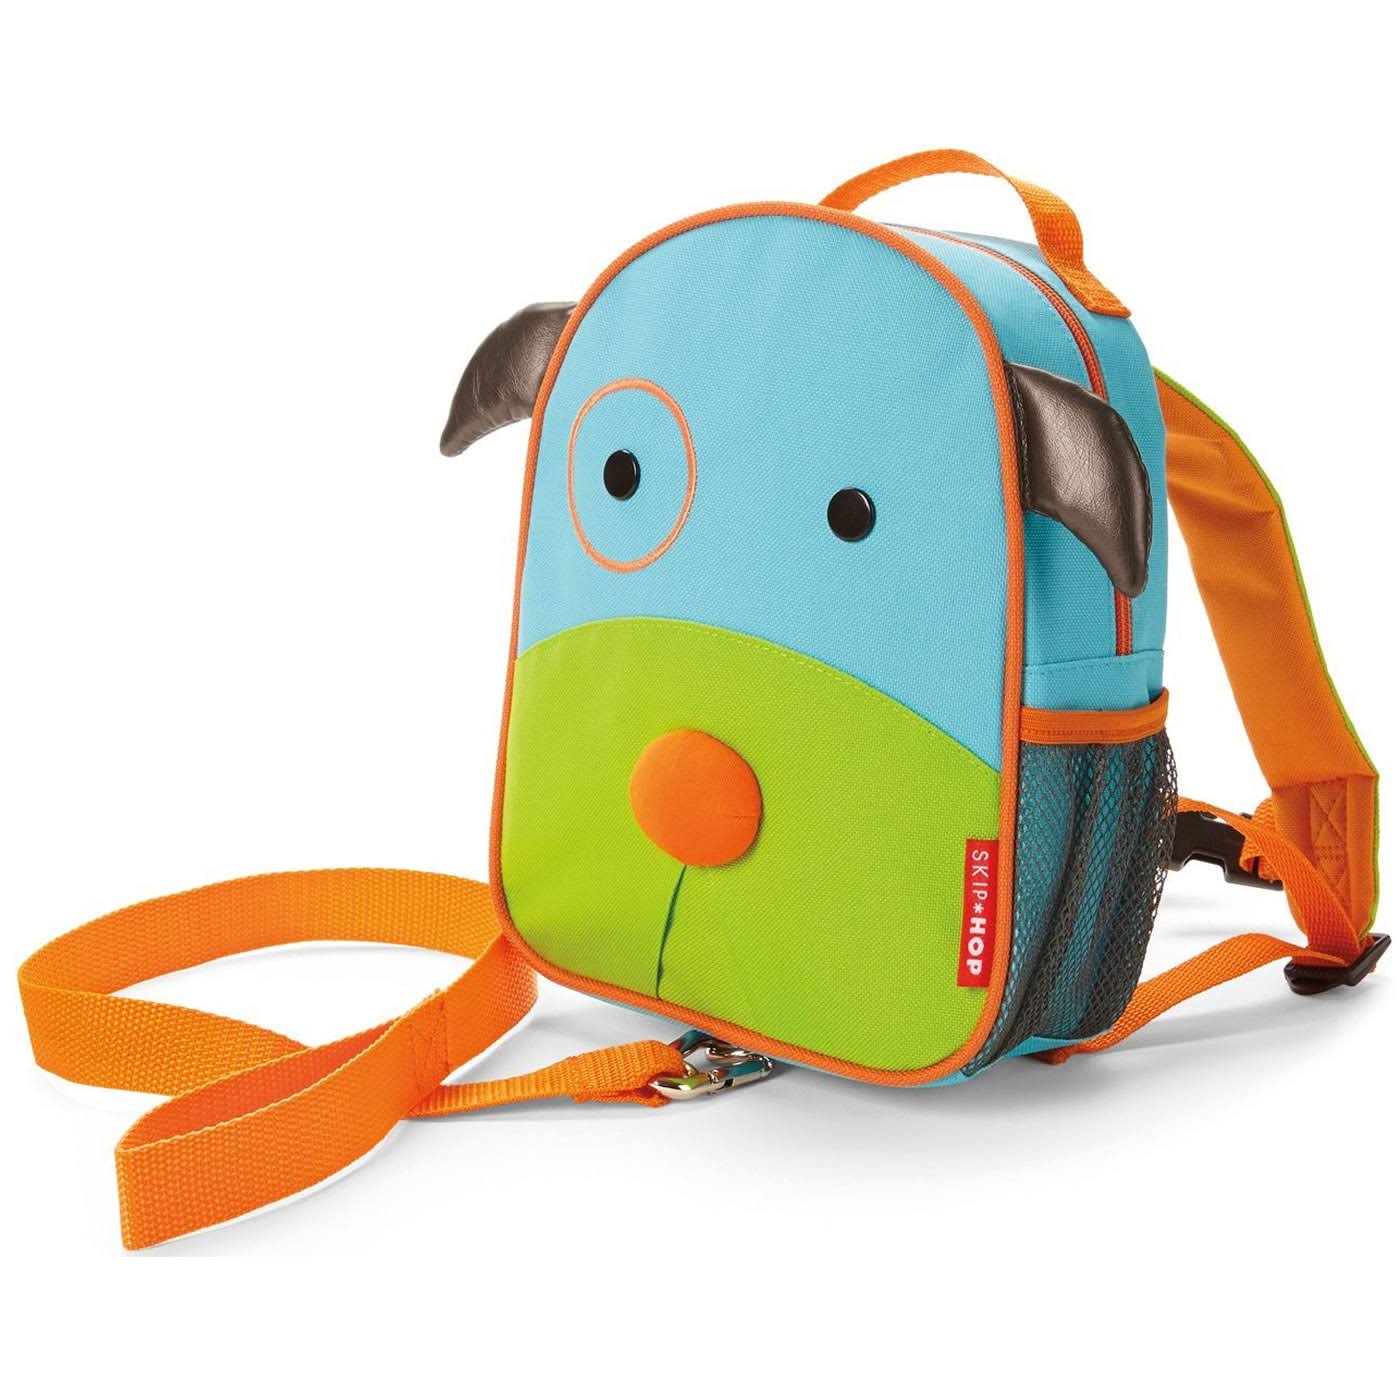 Skip Hop Zoo Little Kid and Toddler Safety Harness Backpack - Darby Dog, Blue